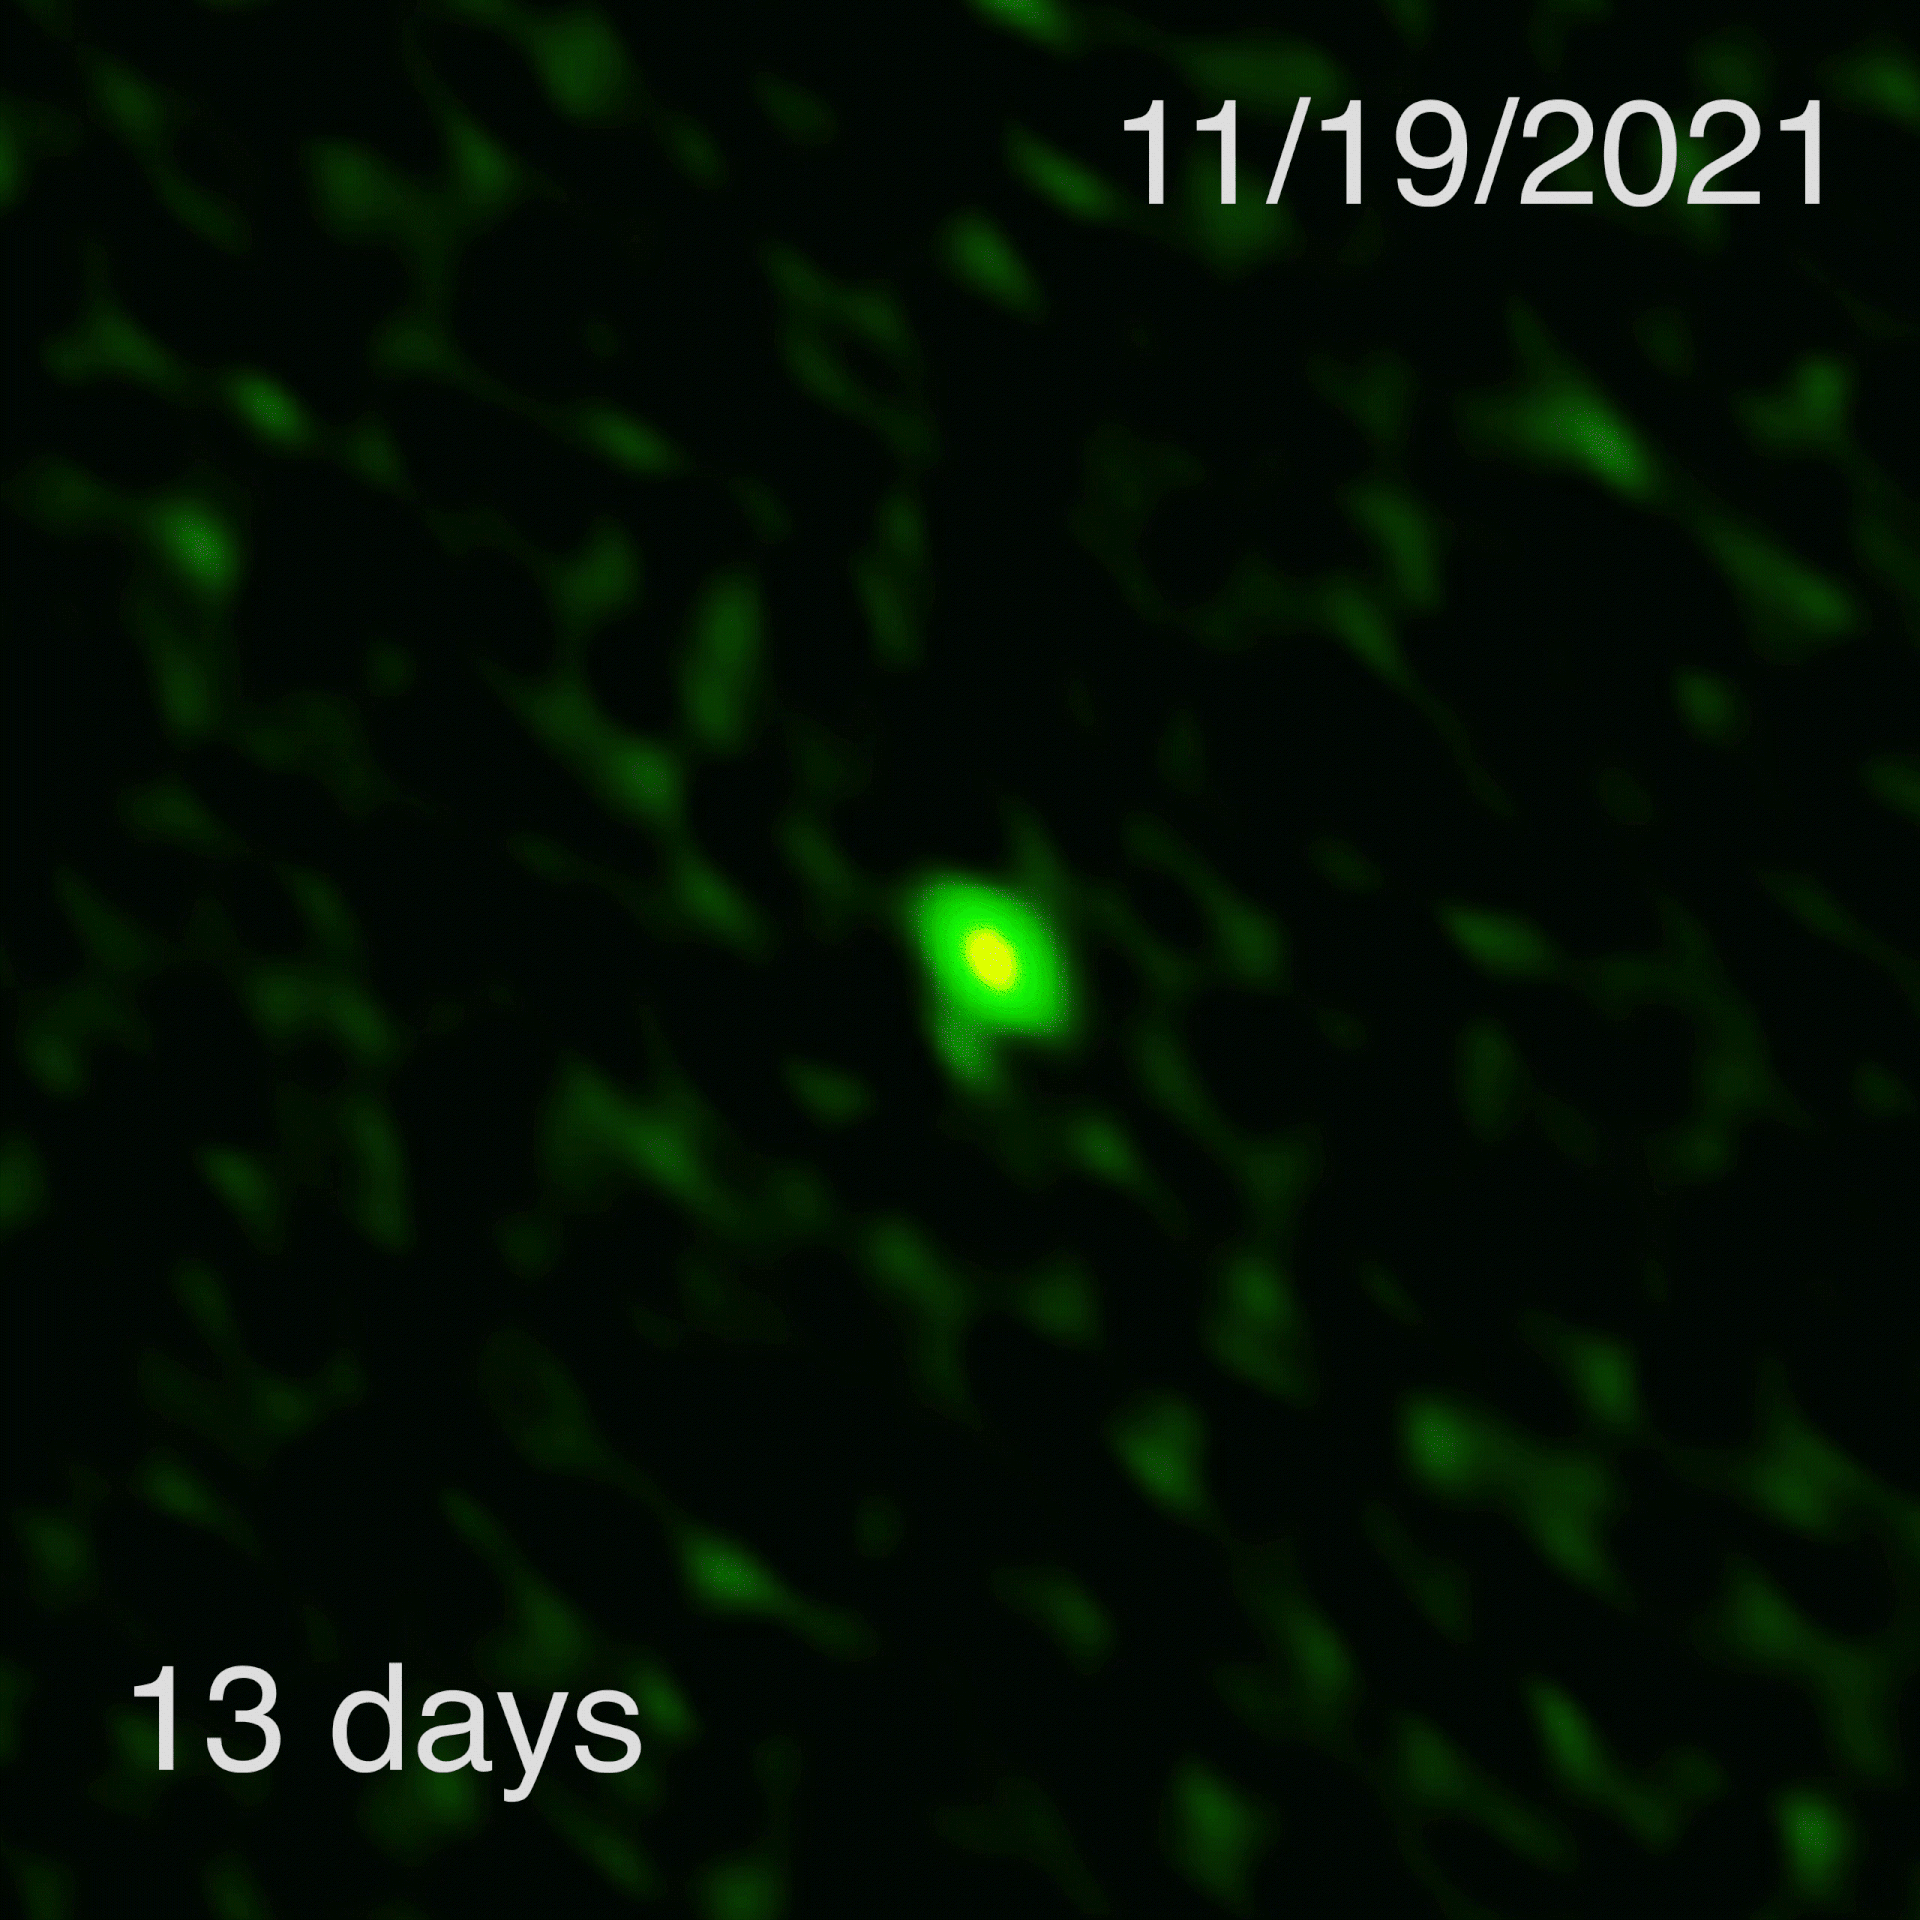 In the first-ever time-lapse movie of a short-duration gamma-ray burst in millimeter-wavelength light, we see GRB 21106A as captured with the Atacama Large Millimeter/submillimeter Array (ALMA). The millimeter light seen here pinpoints the location of the event to a distant host galaxy in images captured using the Hubble Space Telescope. The evolution of the millimeter light’s brightness provides information on the energy and geometry of the jets produced in the explosion. Credit: ALMA (ESO/NAOJ/NRAO), T. Laskar (Utah), S. Dagnello (NRAO/AUI/NSF)